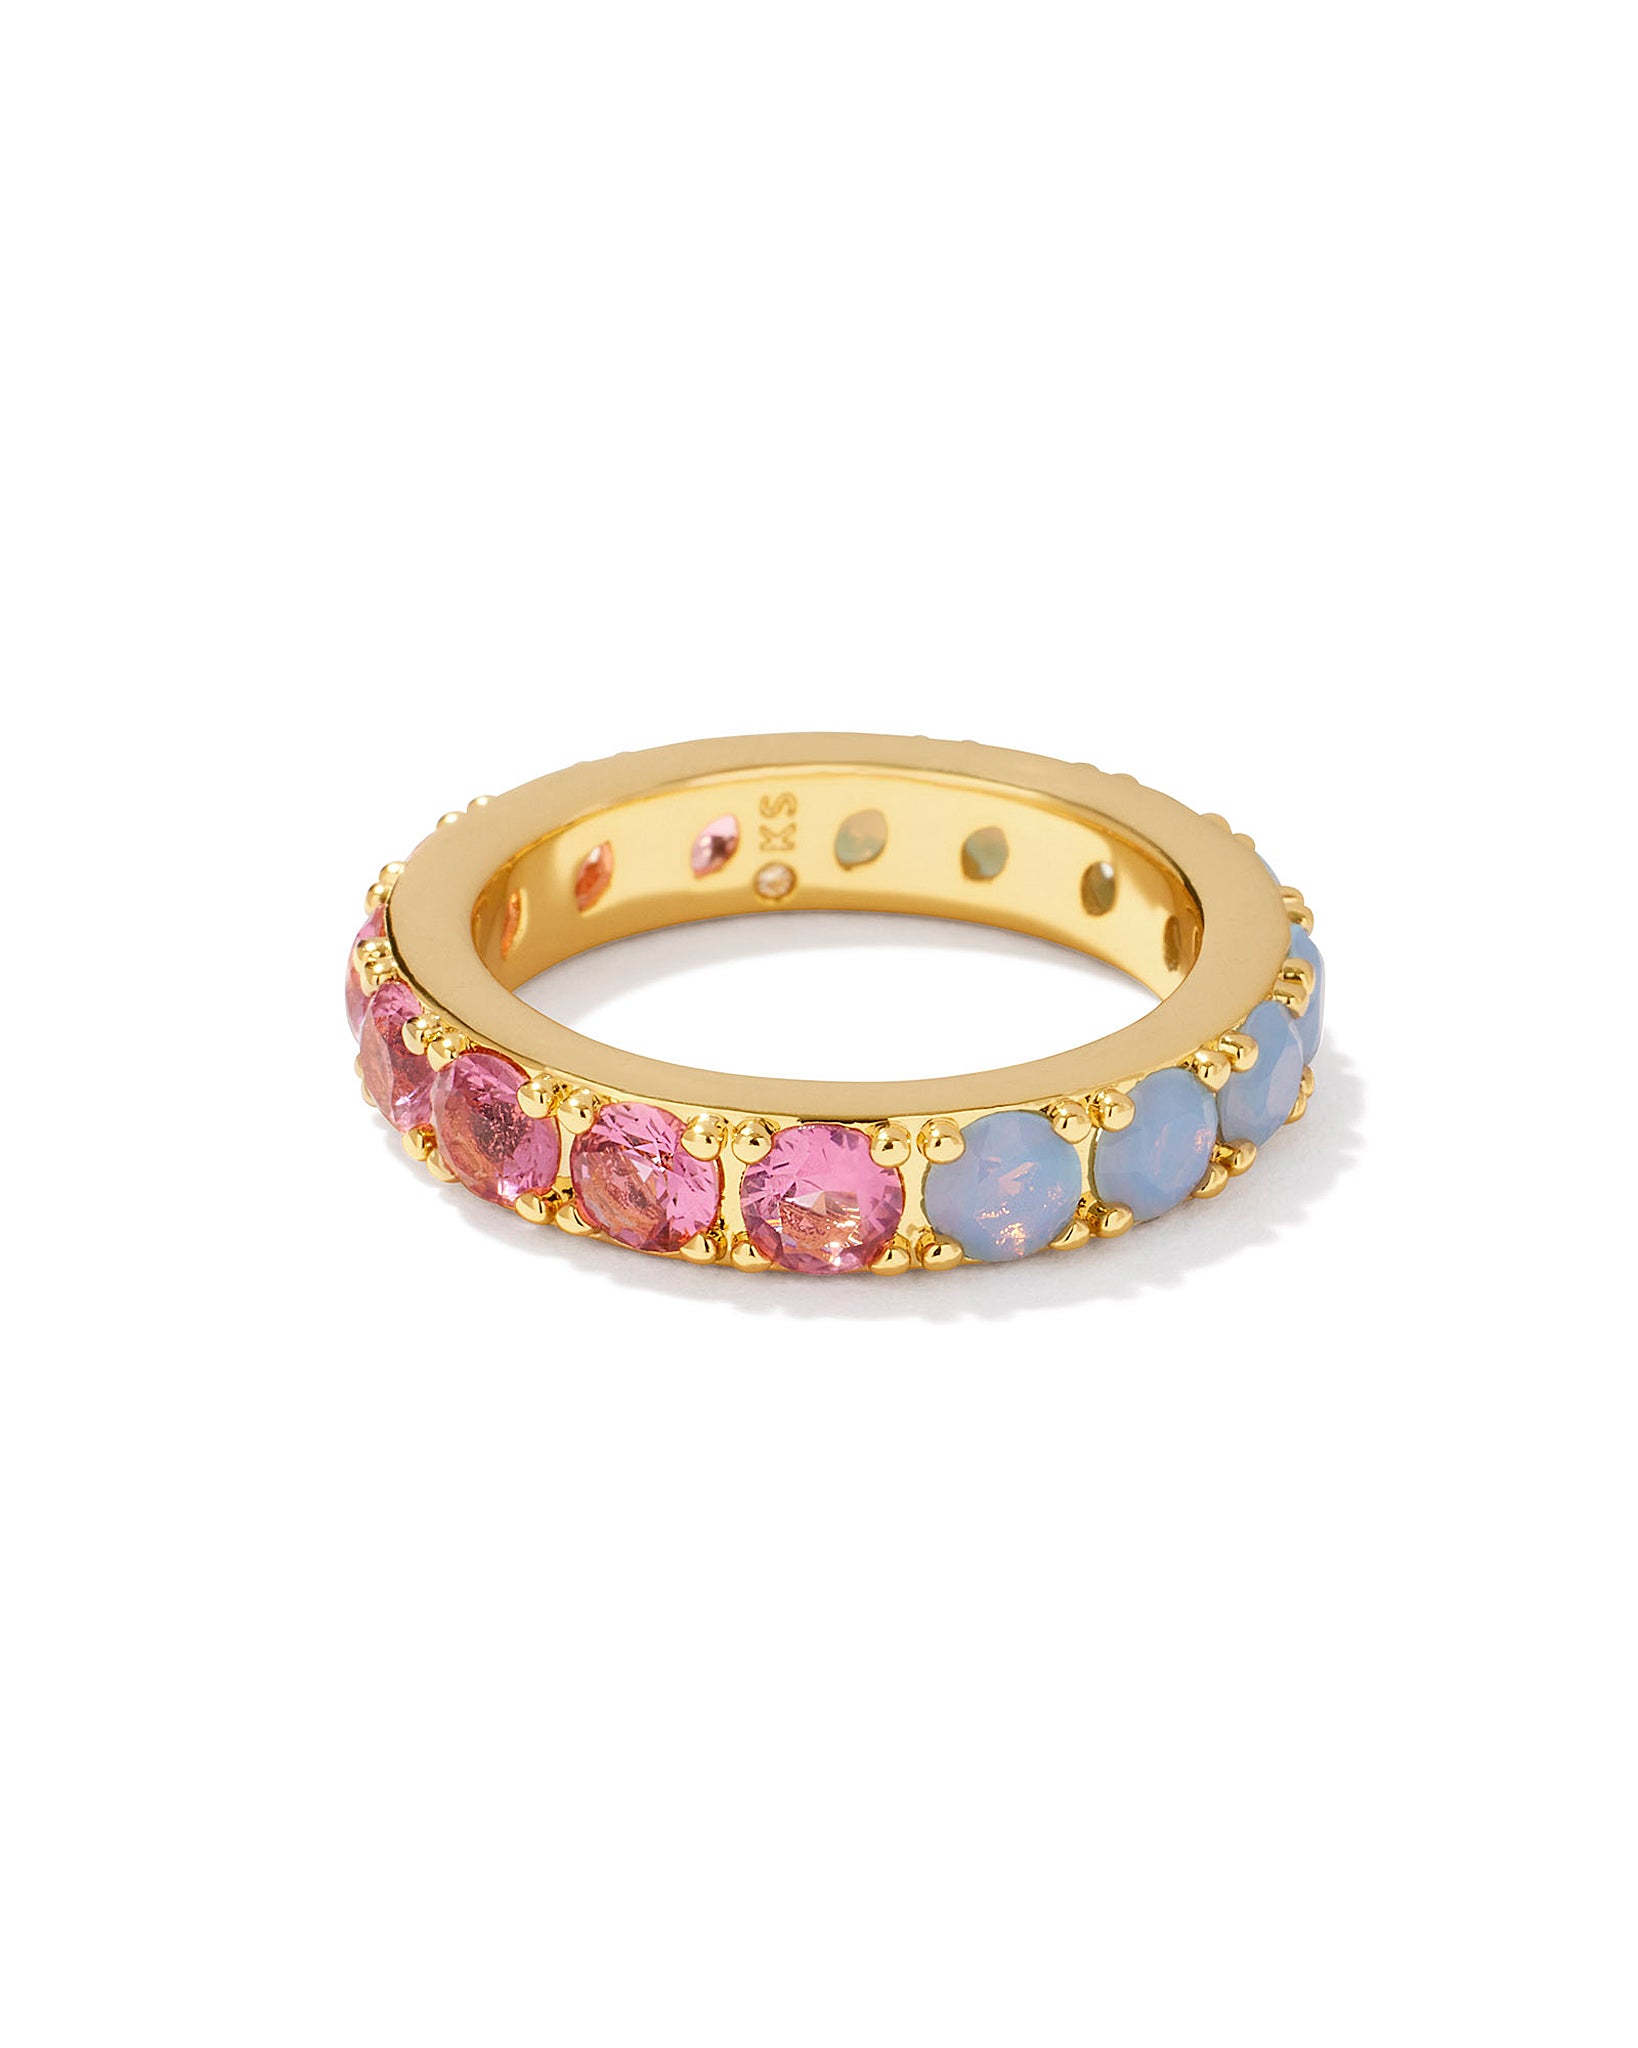 Kendra Scott Chandler Band Ring in Pink Blue Mix and Gold Size 8